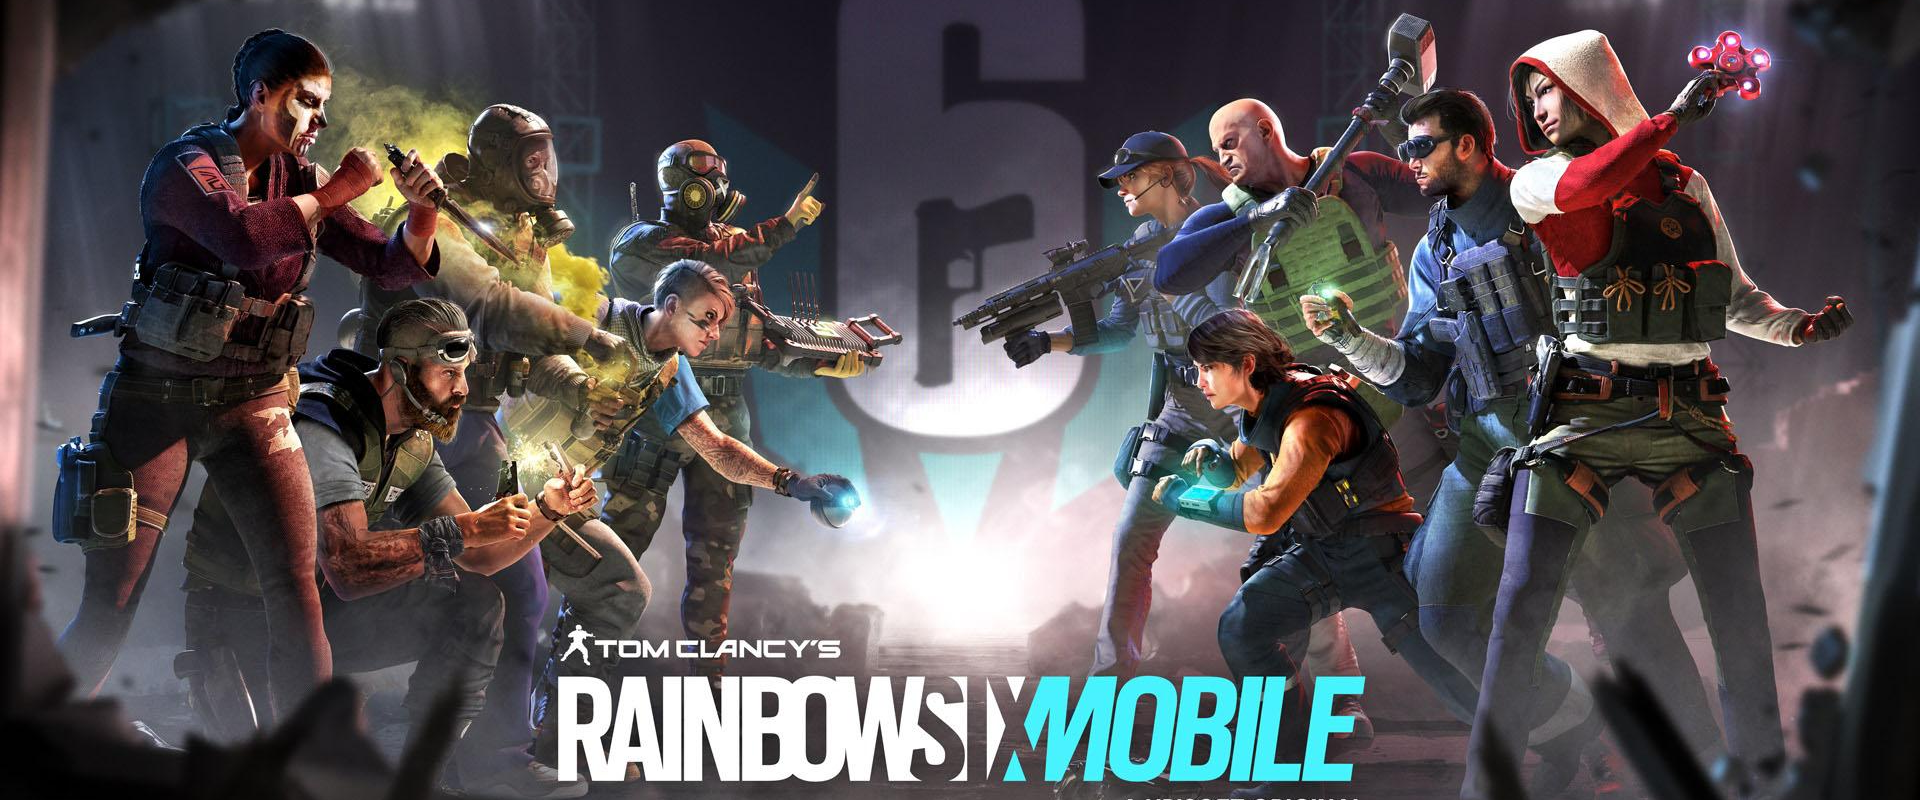 Download & Play Rainbow Six Mobile on PC & Mac with NoxPlayer (Emulator)